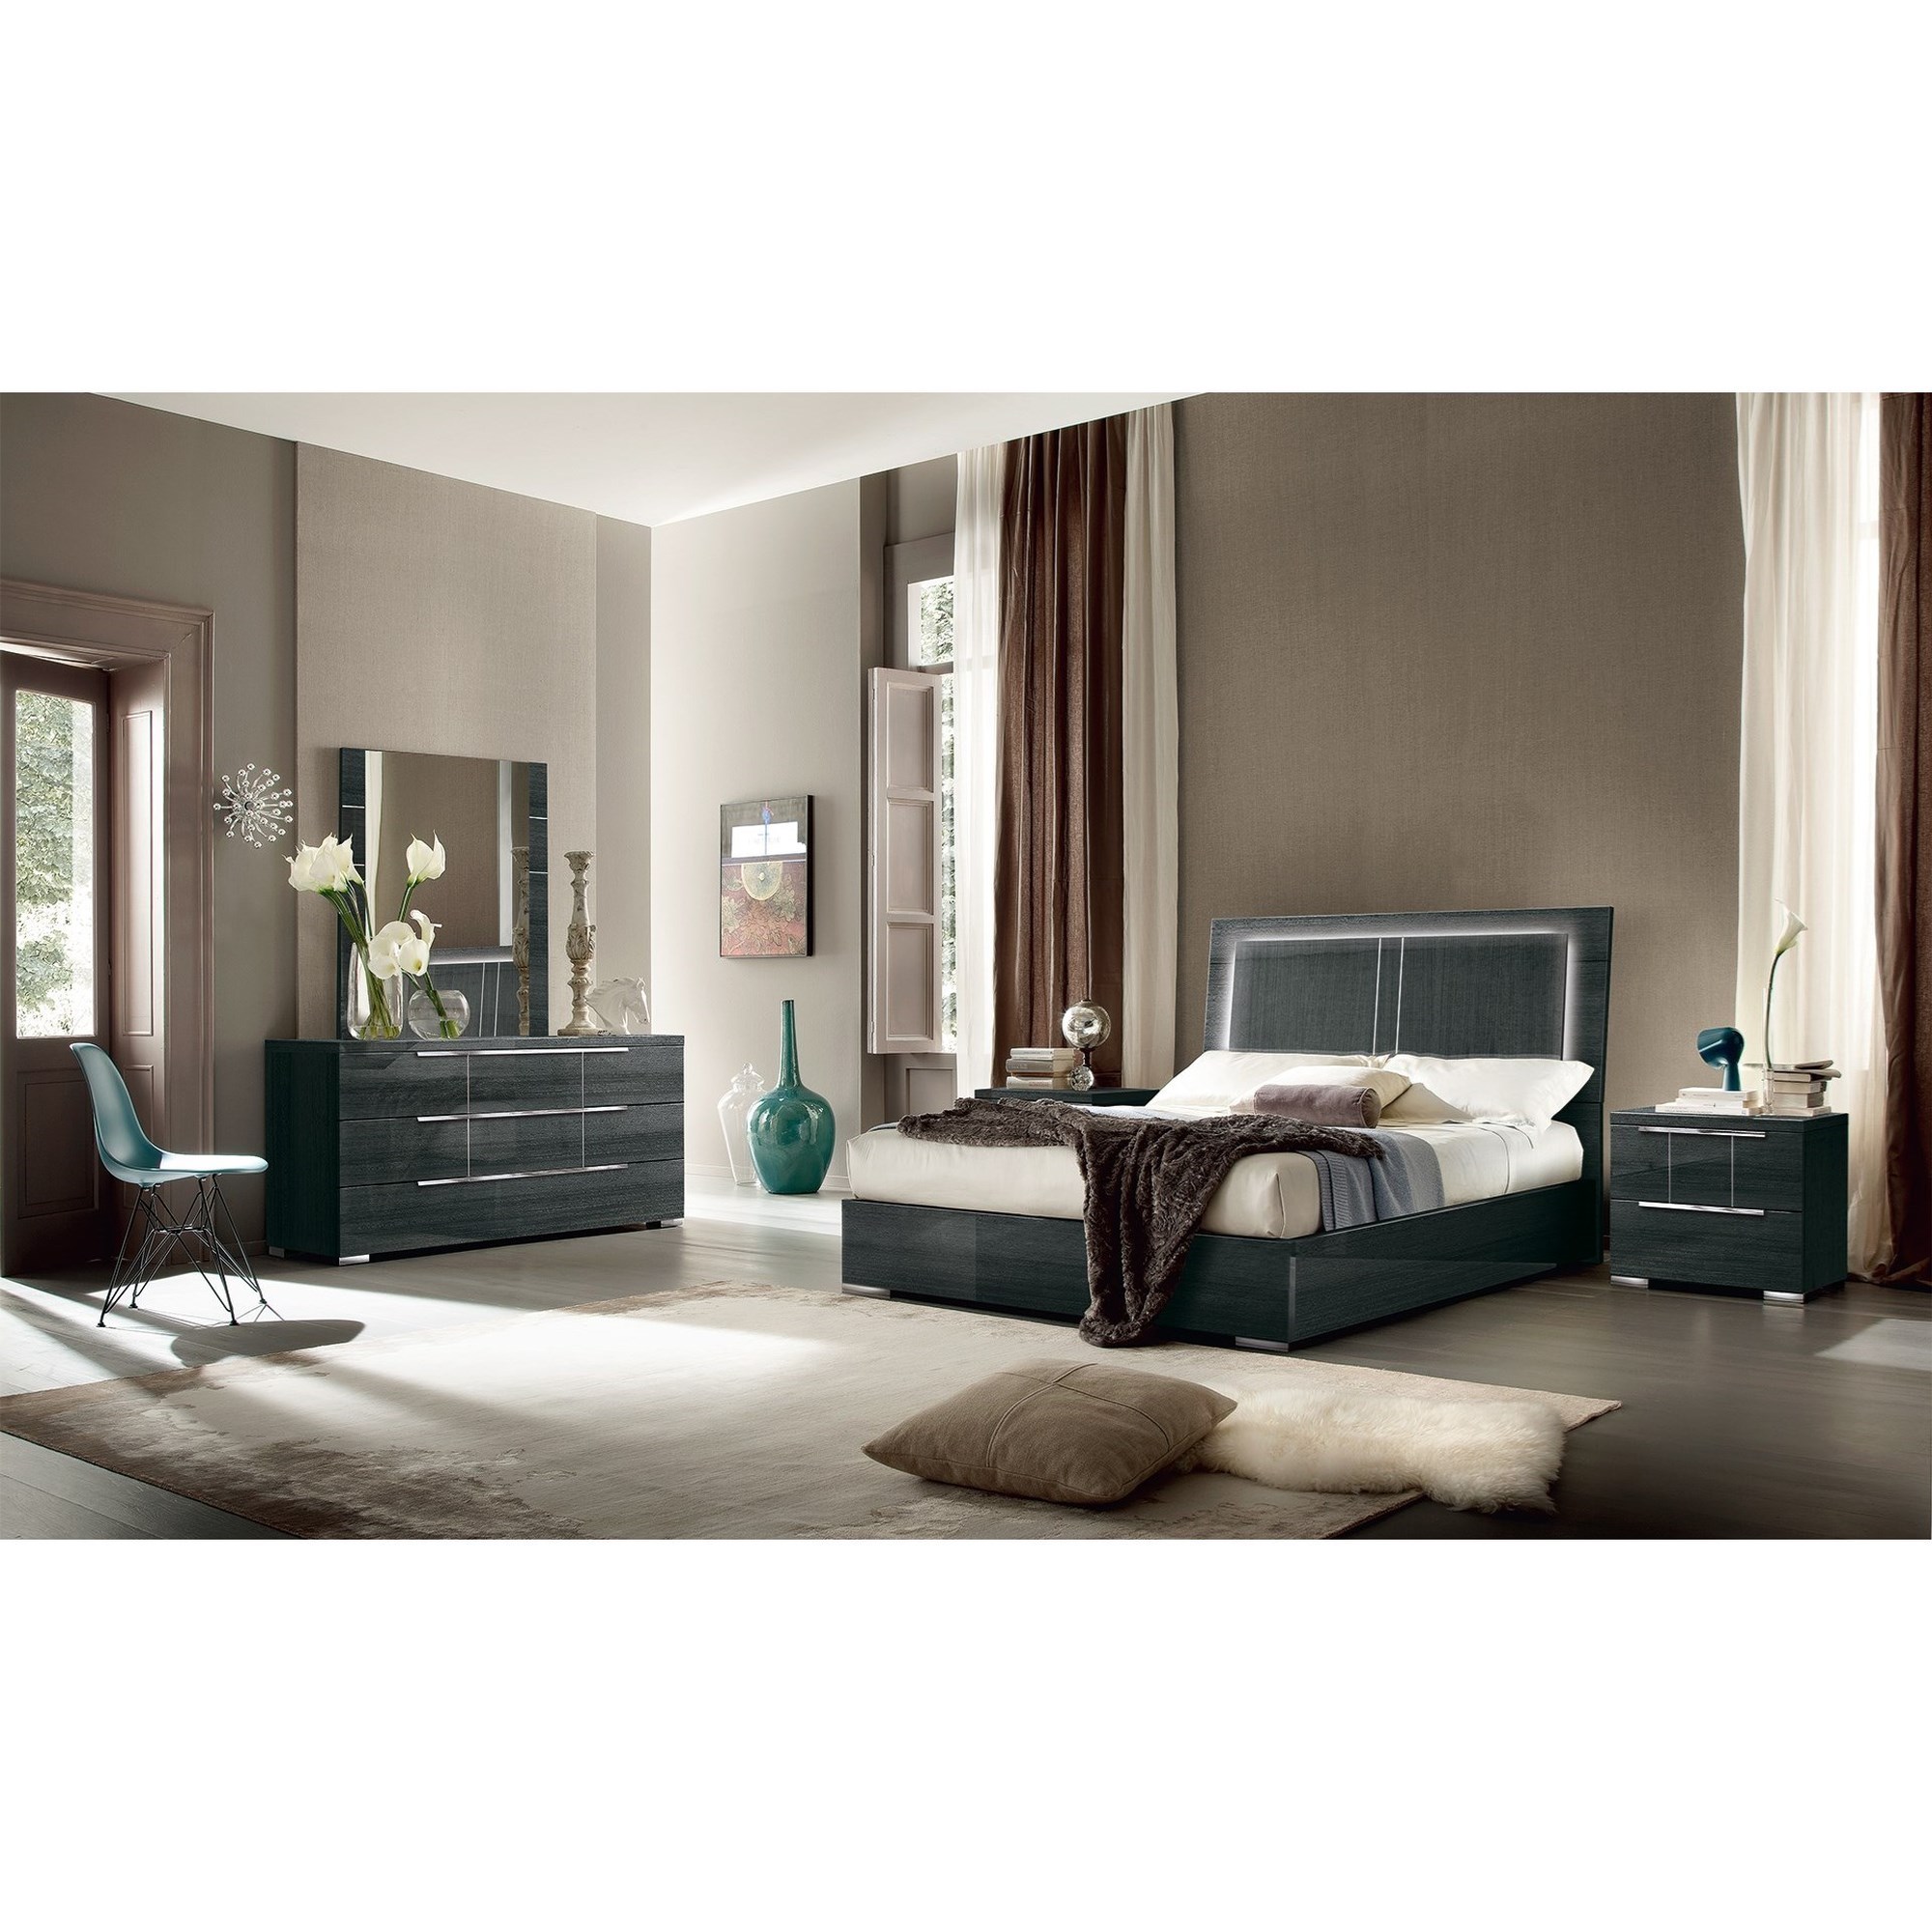 Riviera Queen Size Bedroom Set by ALF Group